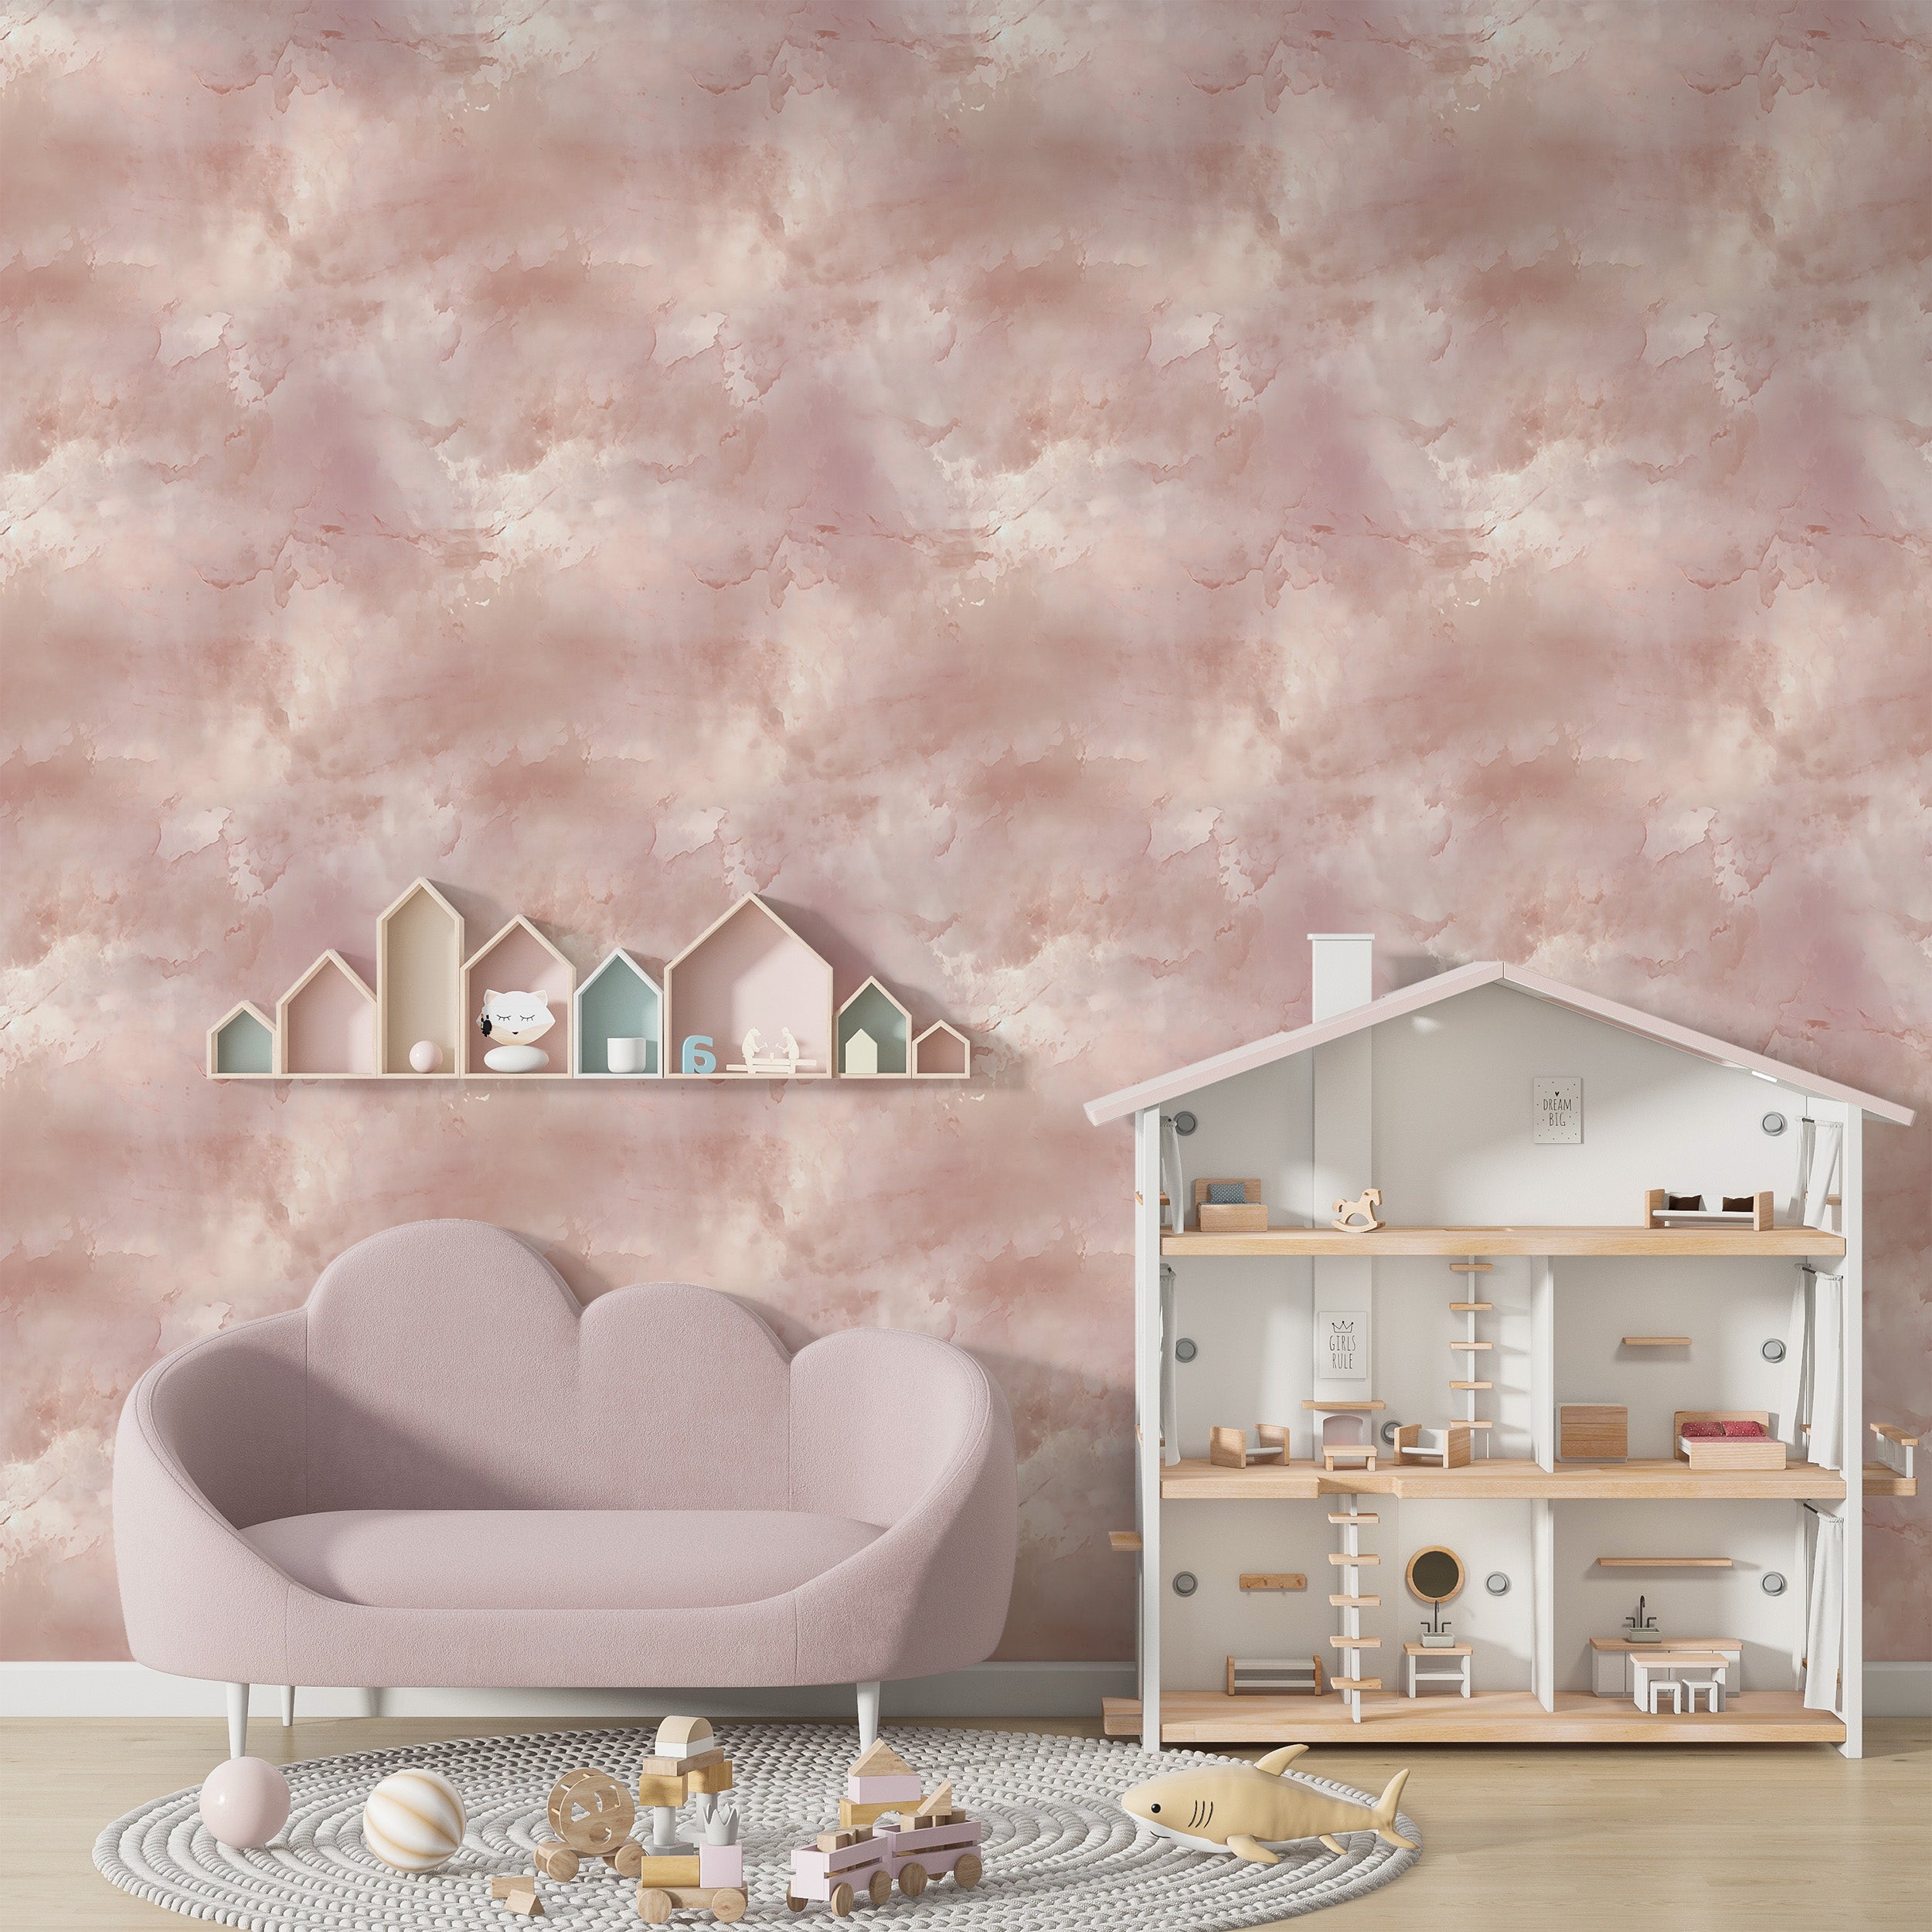 Subtle Charm of Self-Adhesive Pink Wallpaper